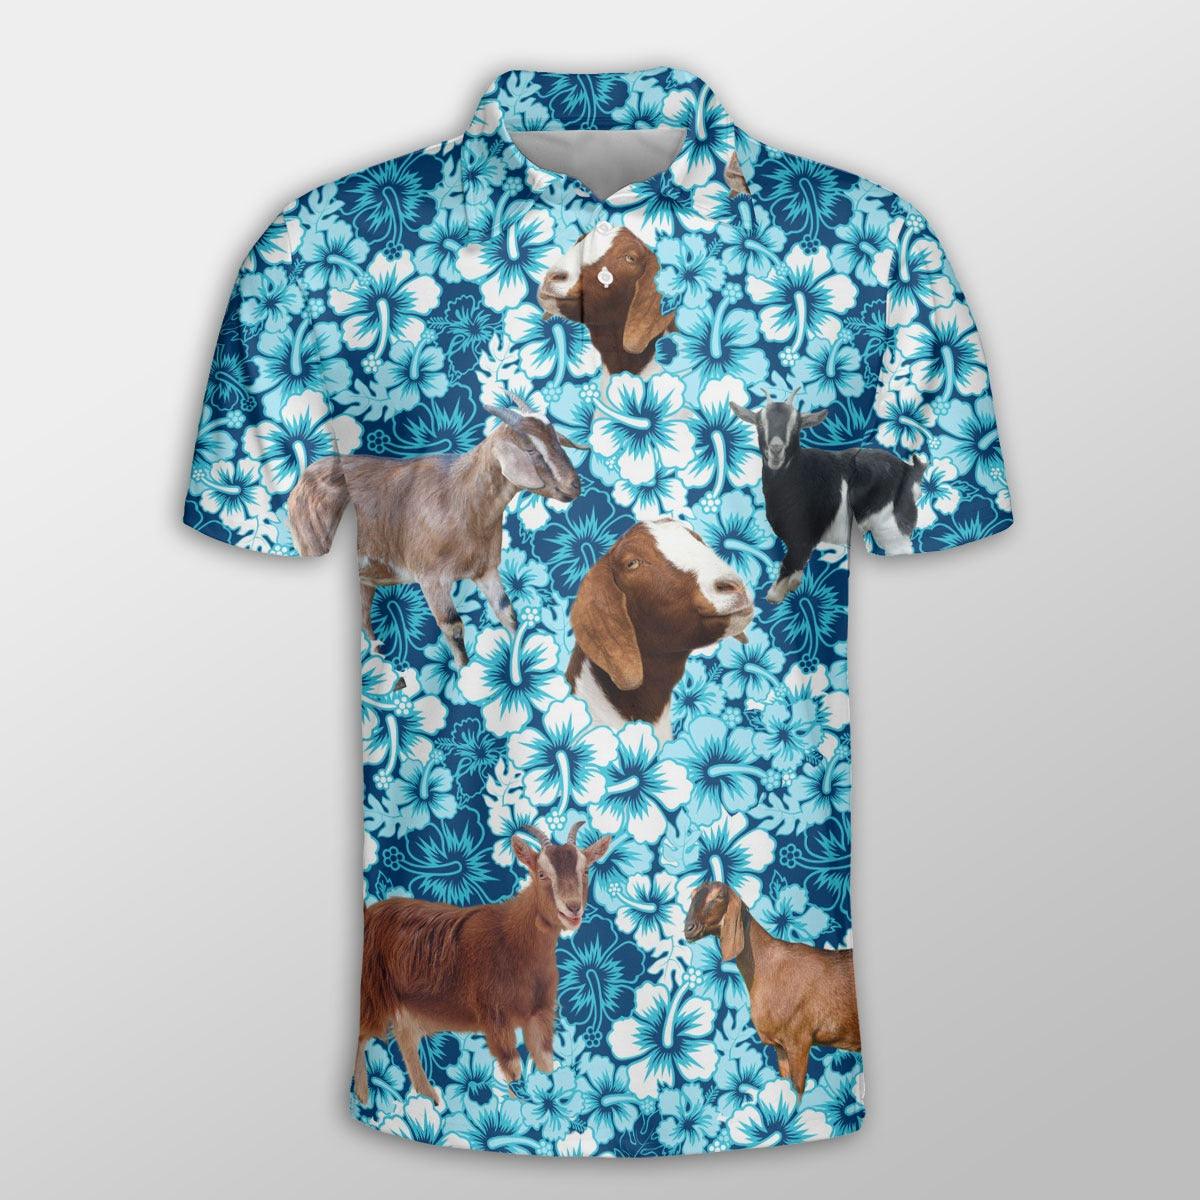 Nubian Goat Men Polo Shirts For Summer - Nubian Goat Blue Hibiscus Pattern Button Shirts For Men - Perfect Gift For Nubian Goat Lovers, Cattle Lovers - Amzanimalsgift